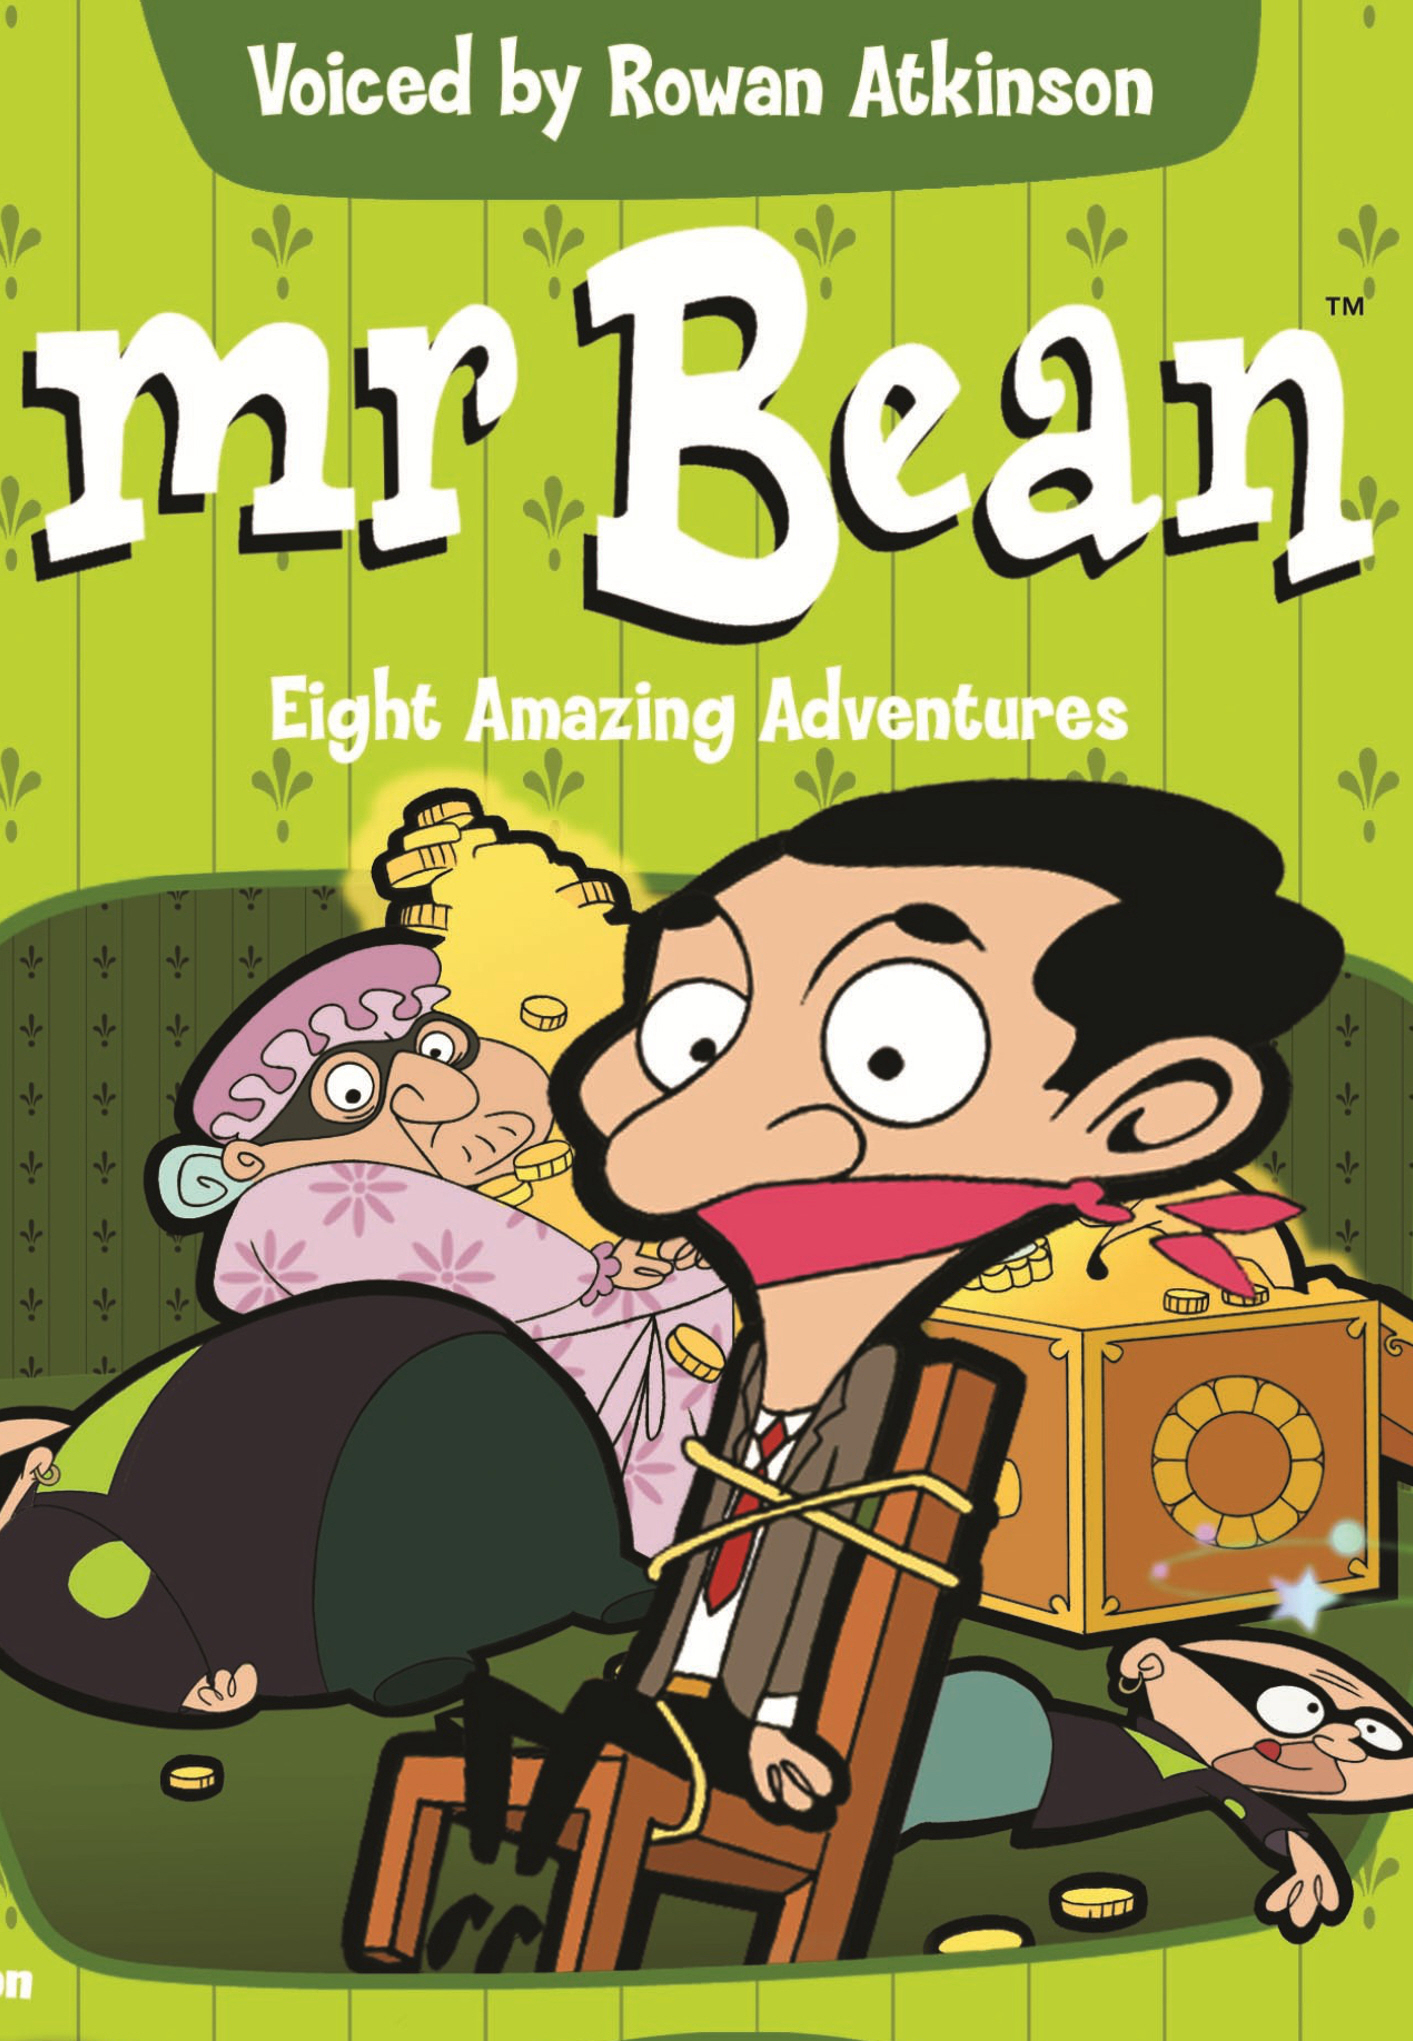 Mr. Bean: The Animated Series - Where to Watch and Stream - TV Guide